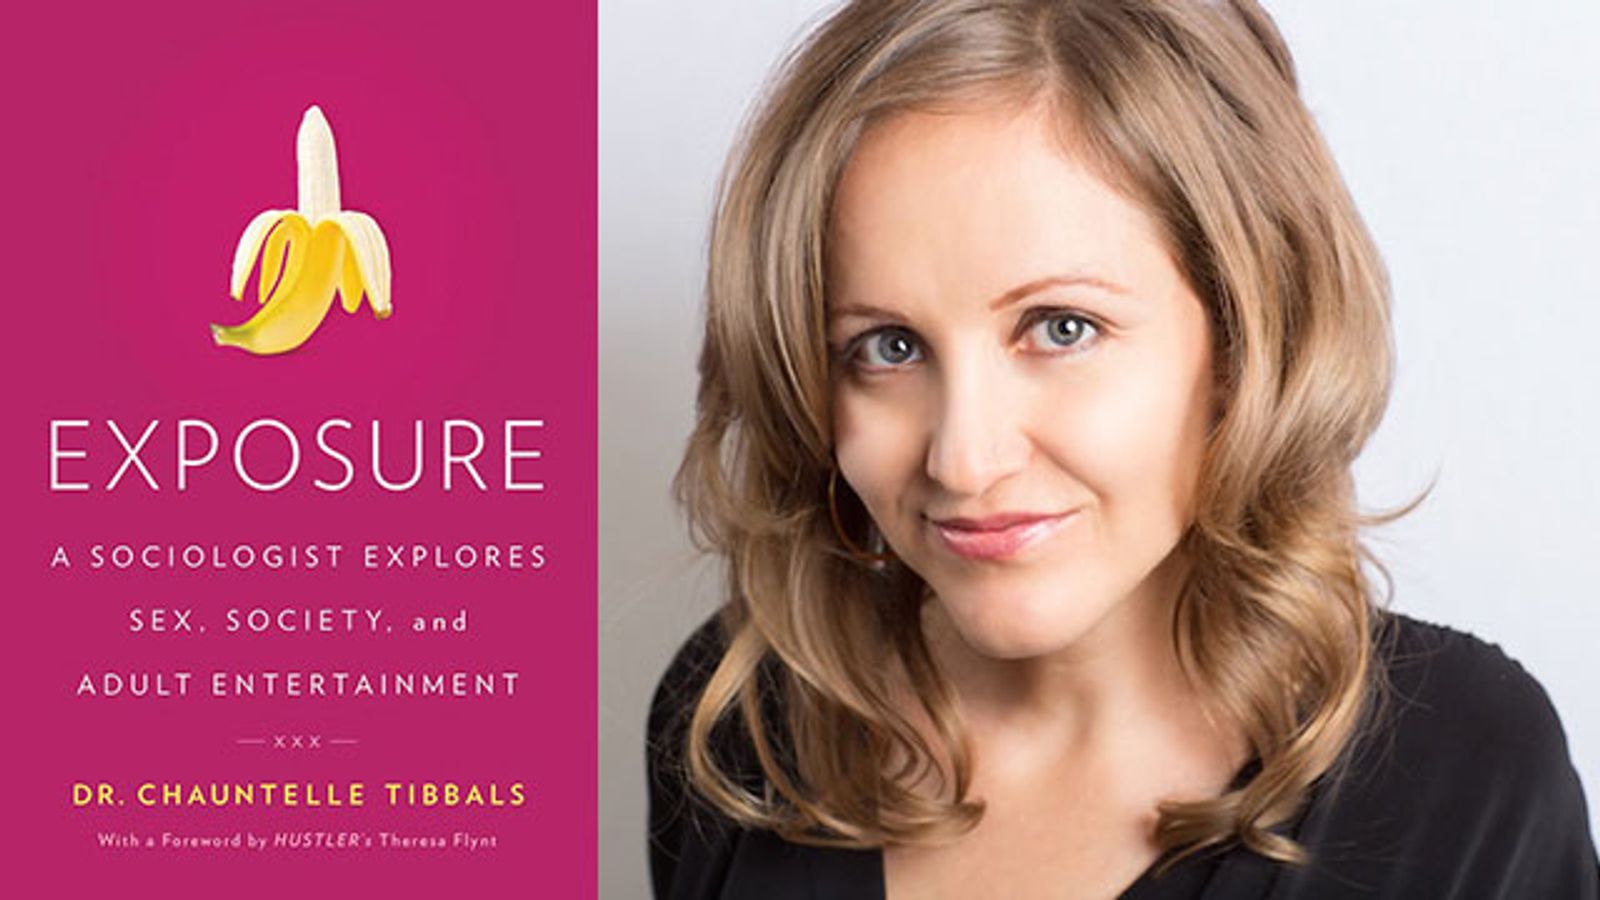 ‘Exposure’ From Dr. Chauntelle Tibbals Can Be Pre-Ordered As Amazon E-Book